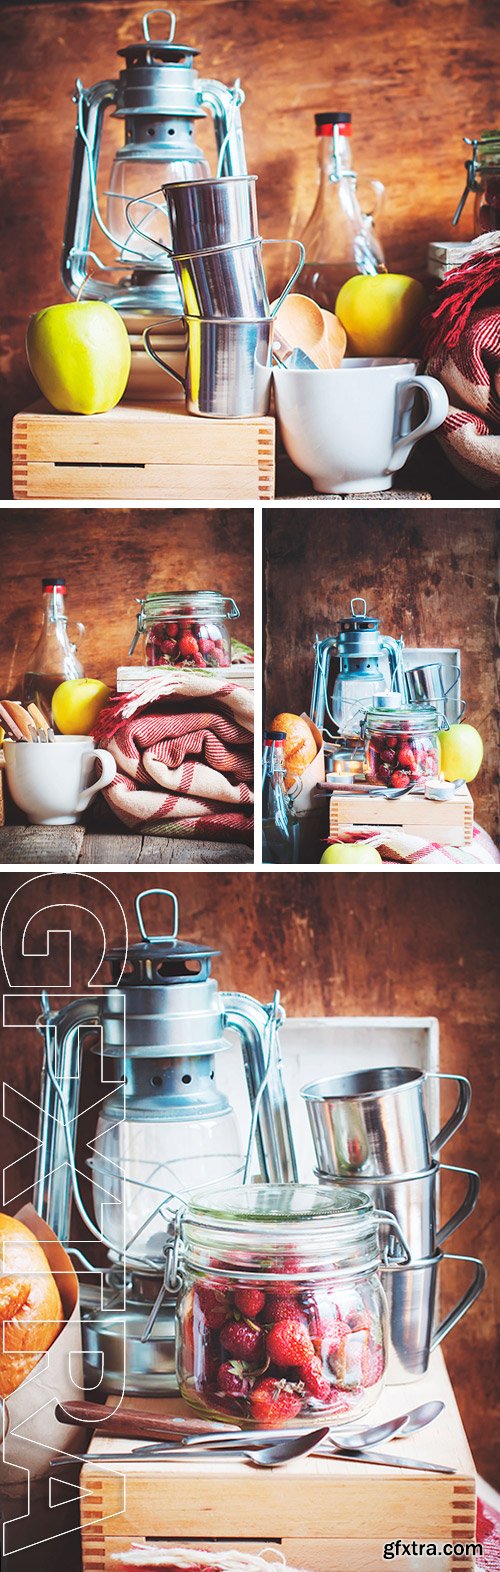 Stock Photos - Still life with Picnic Set of Vintage objects and Food. Interior. Composition